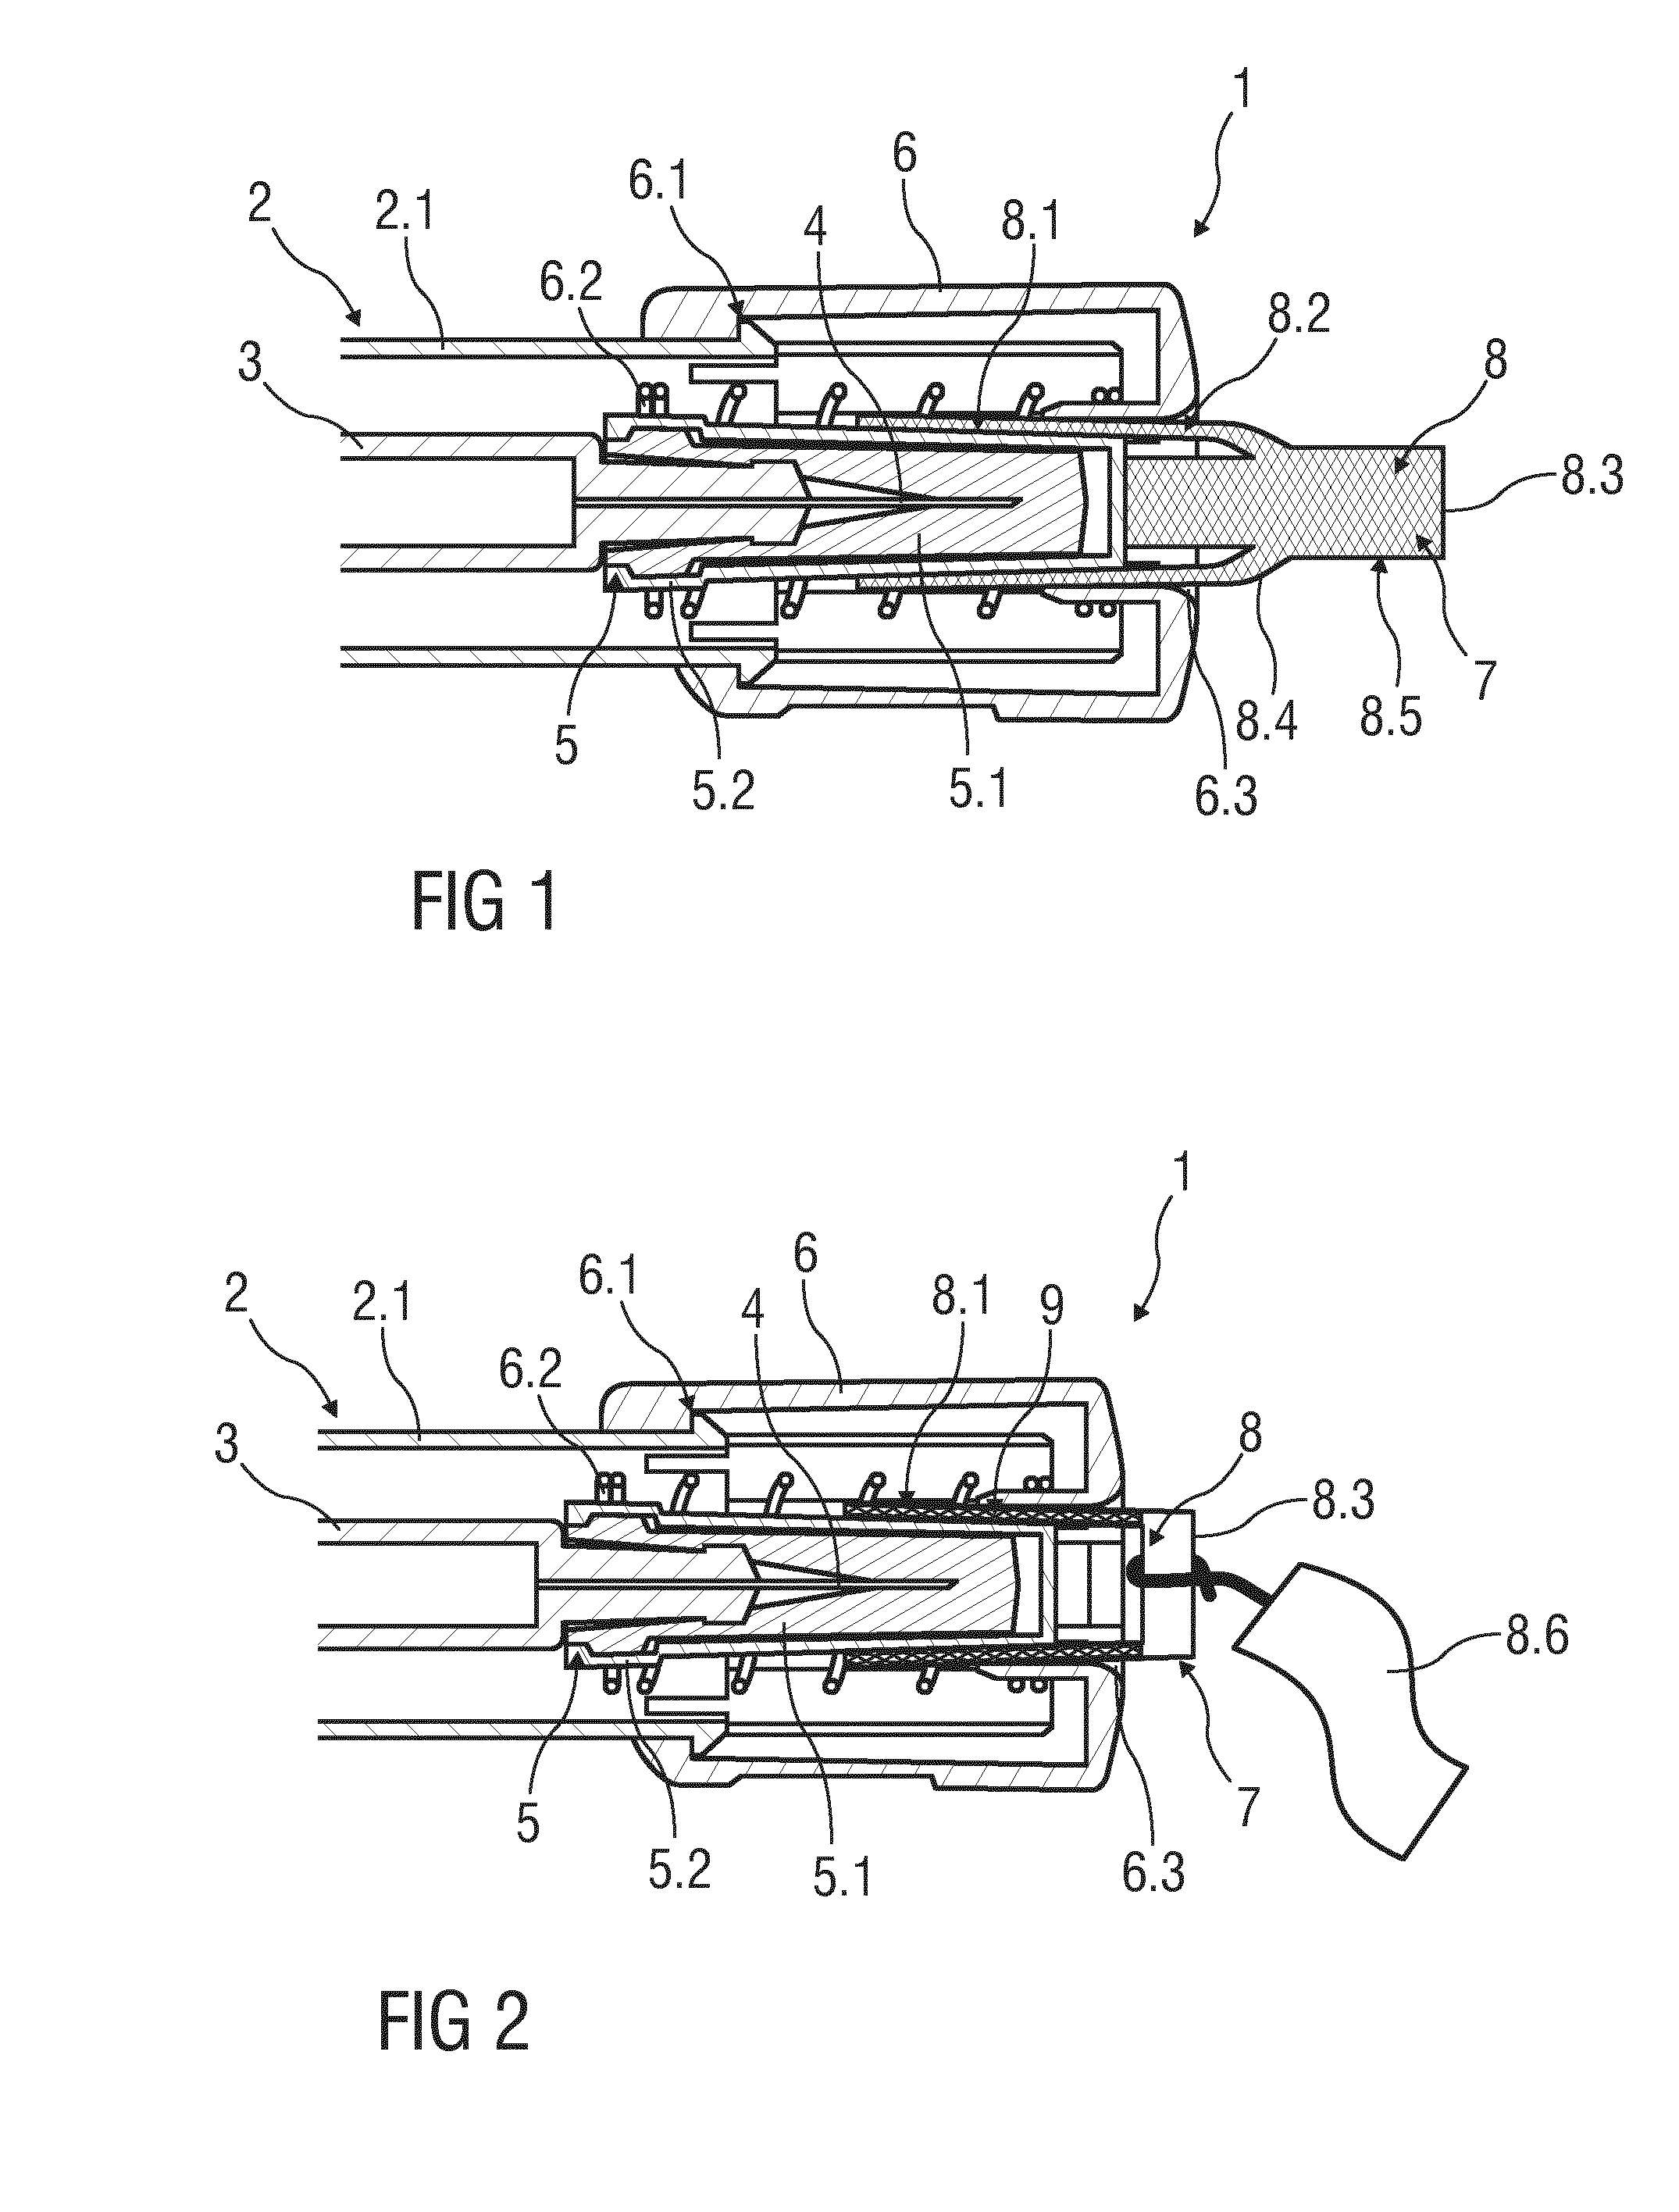 Needle cap remover and drug delivery device